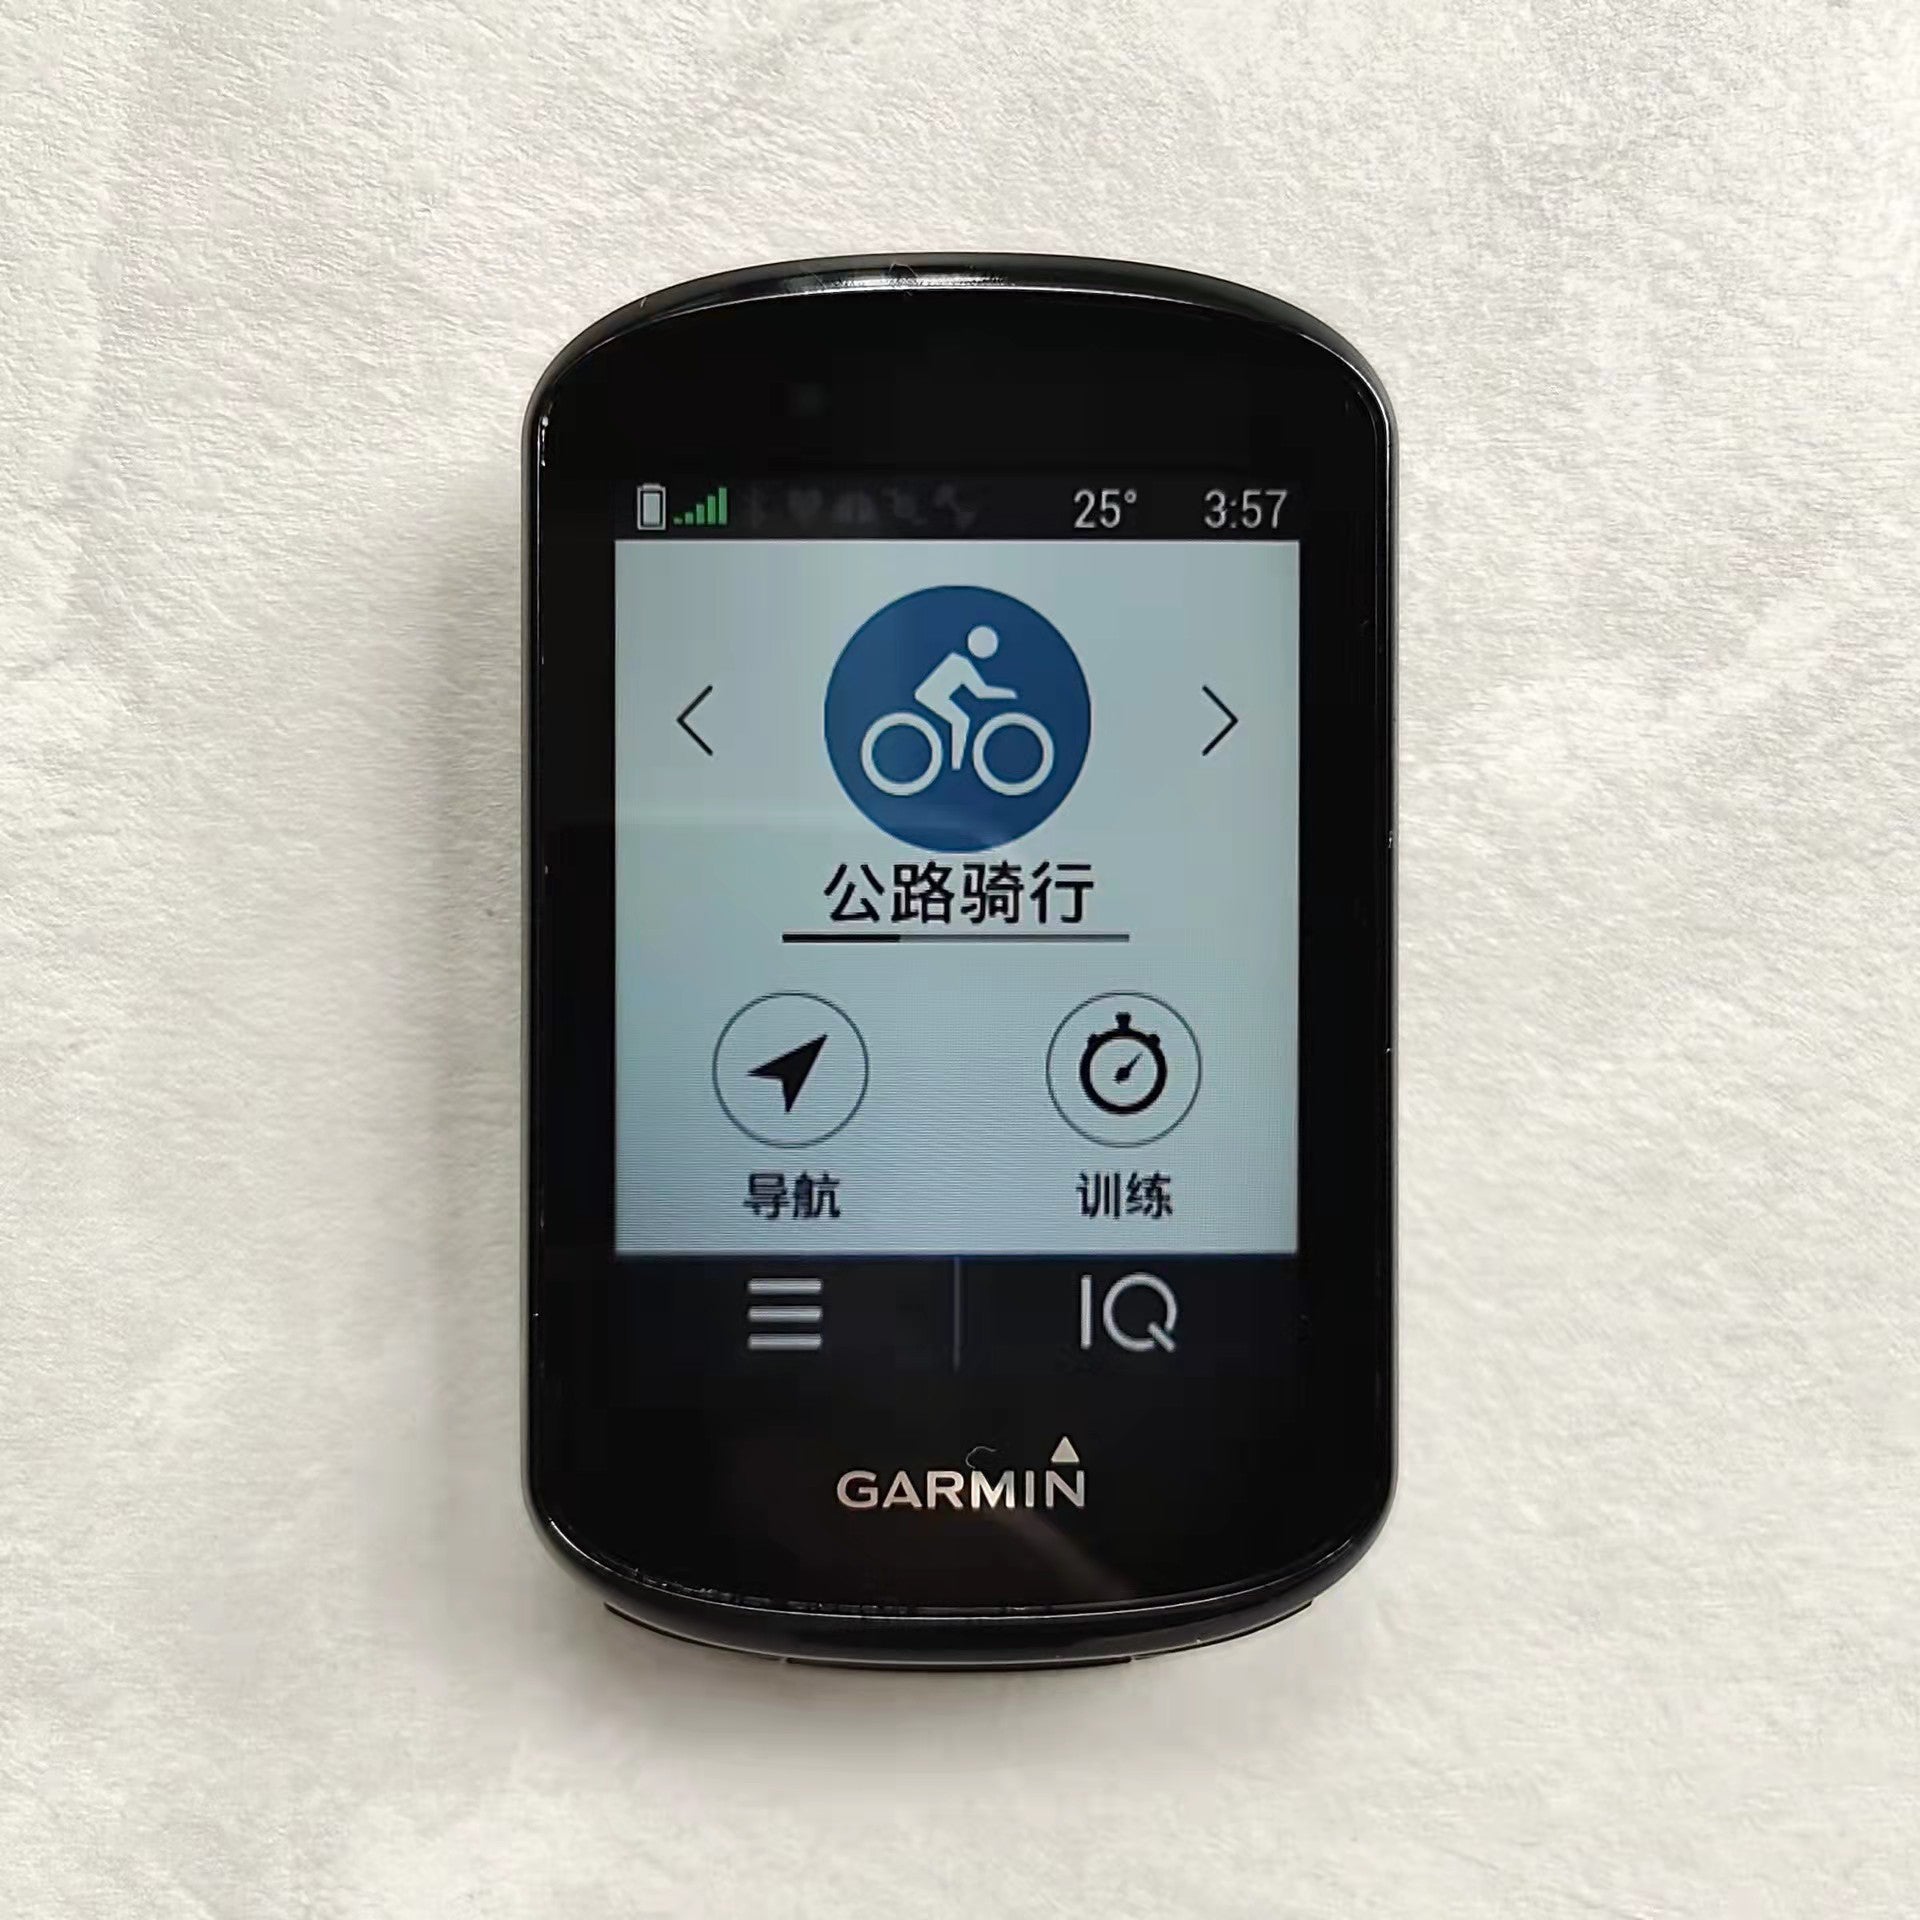 This Garmin Edge 830 is still my favourite toy – and there's crazy